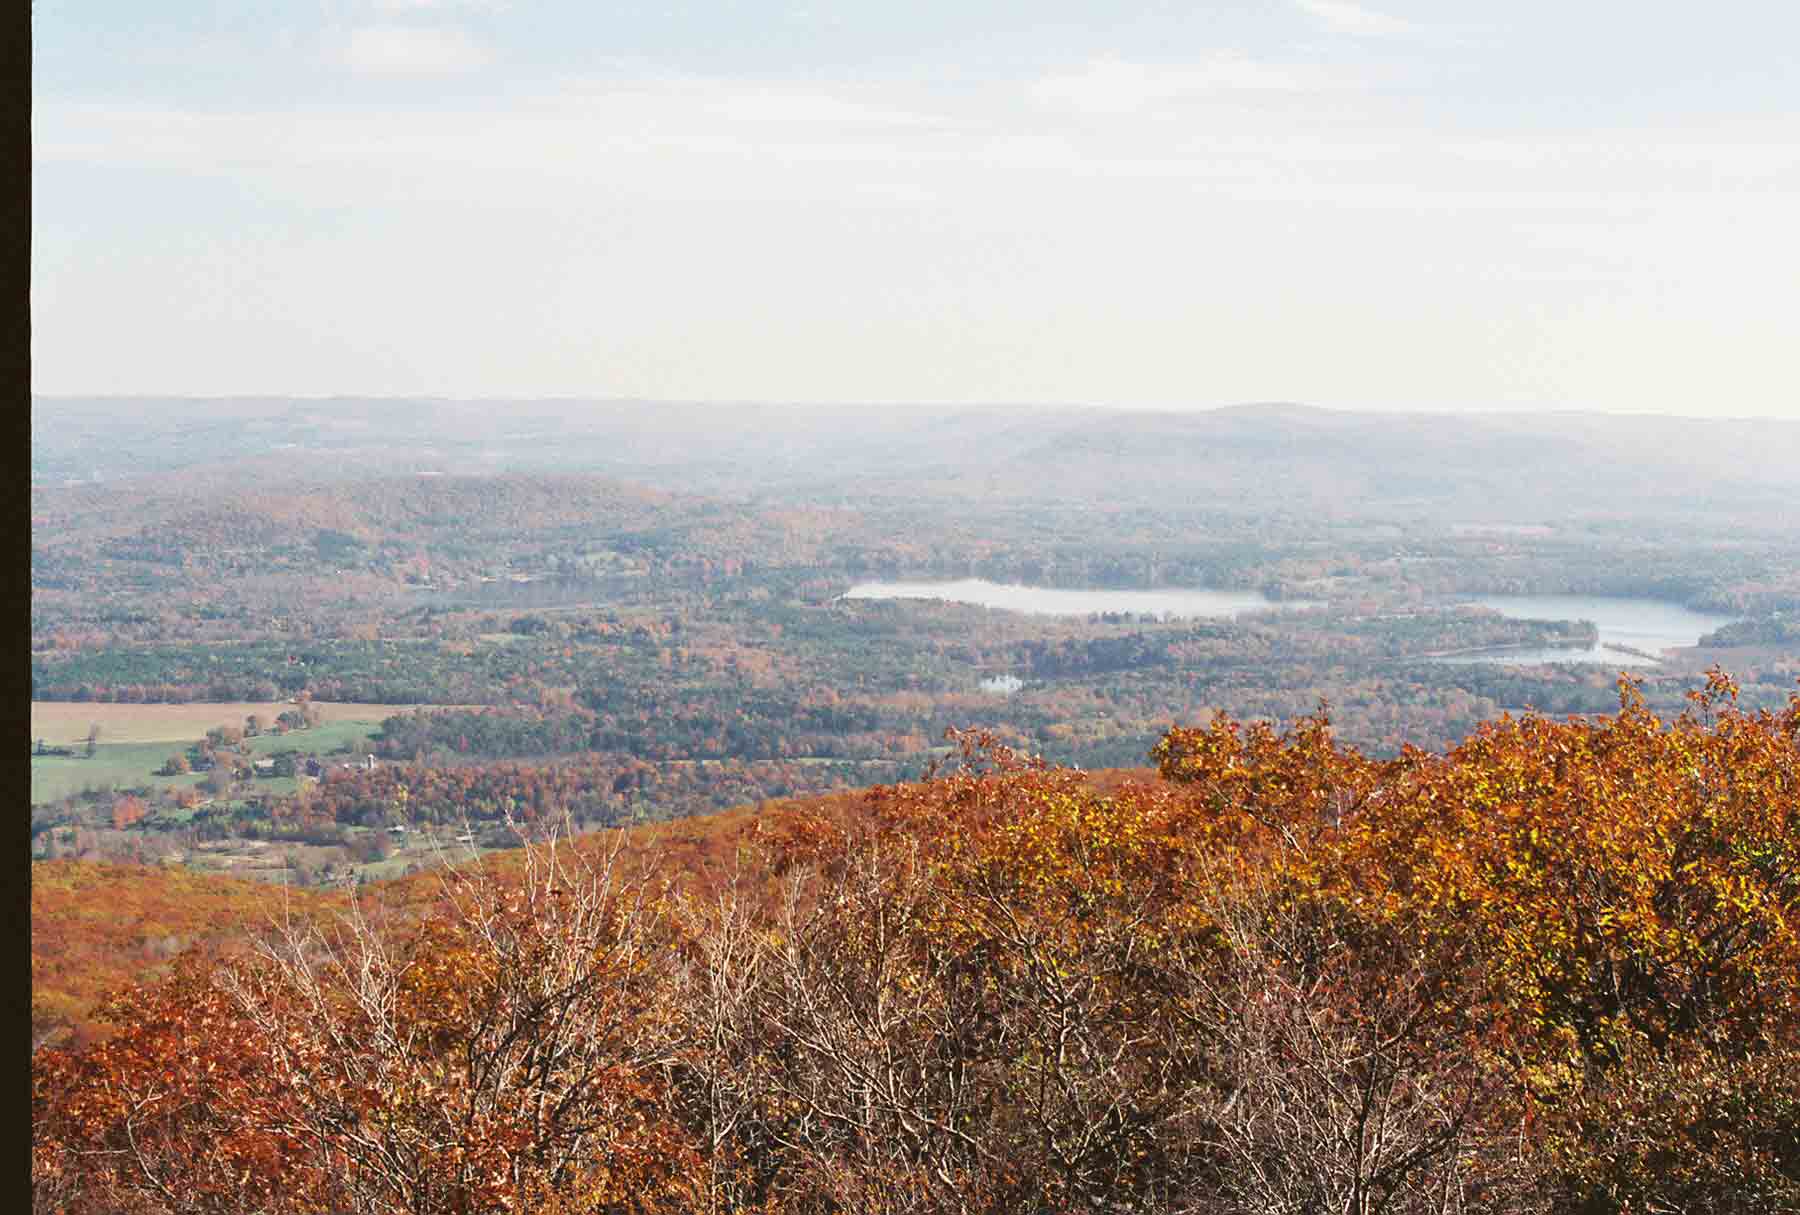 mm 1.4 - View to east from summit of Bear Mt. Courtesy dlcul@conncoll.edu